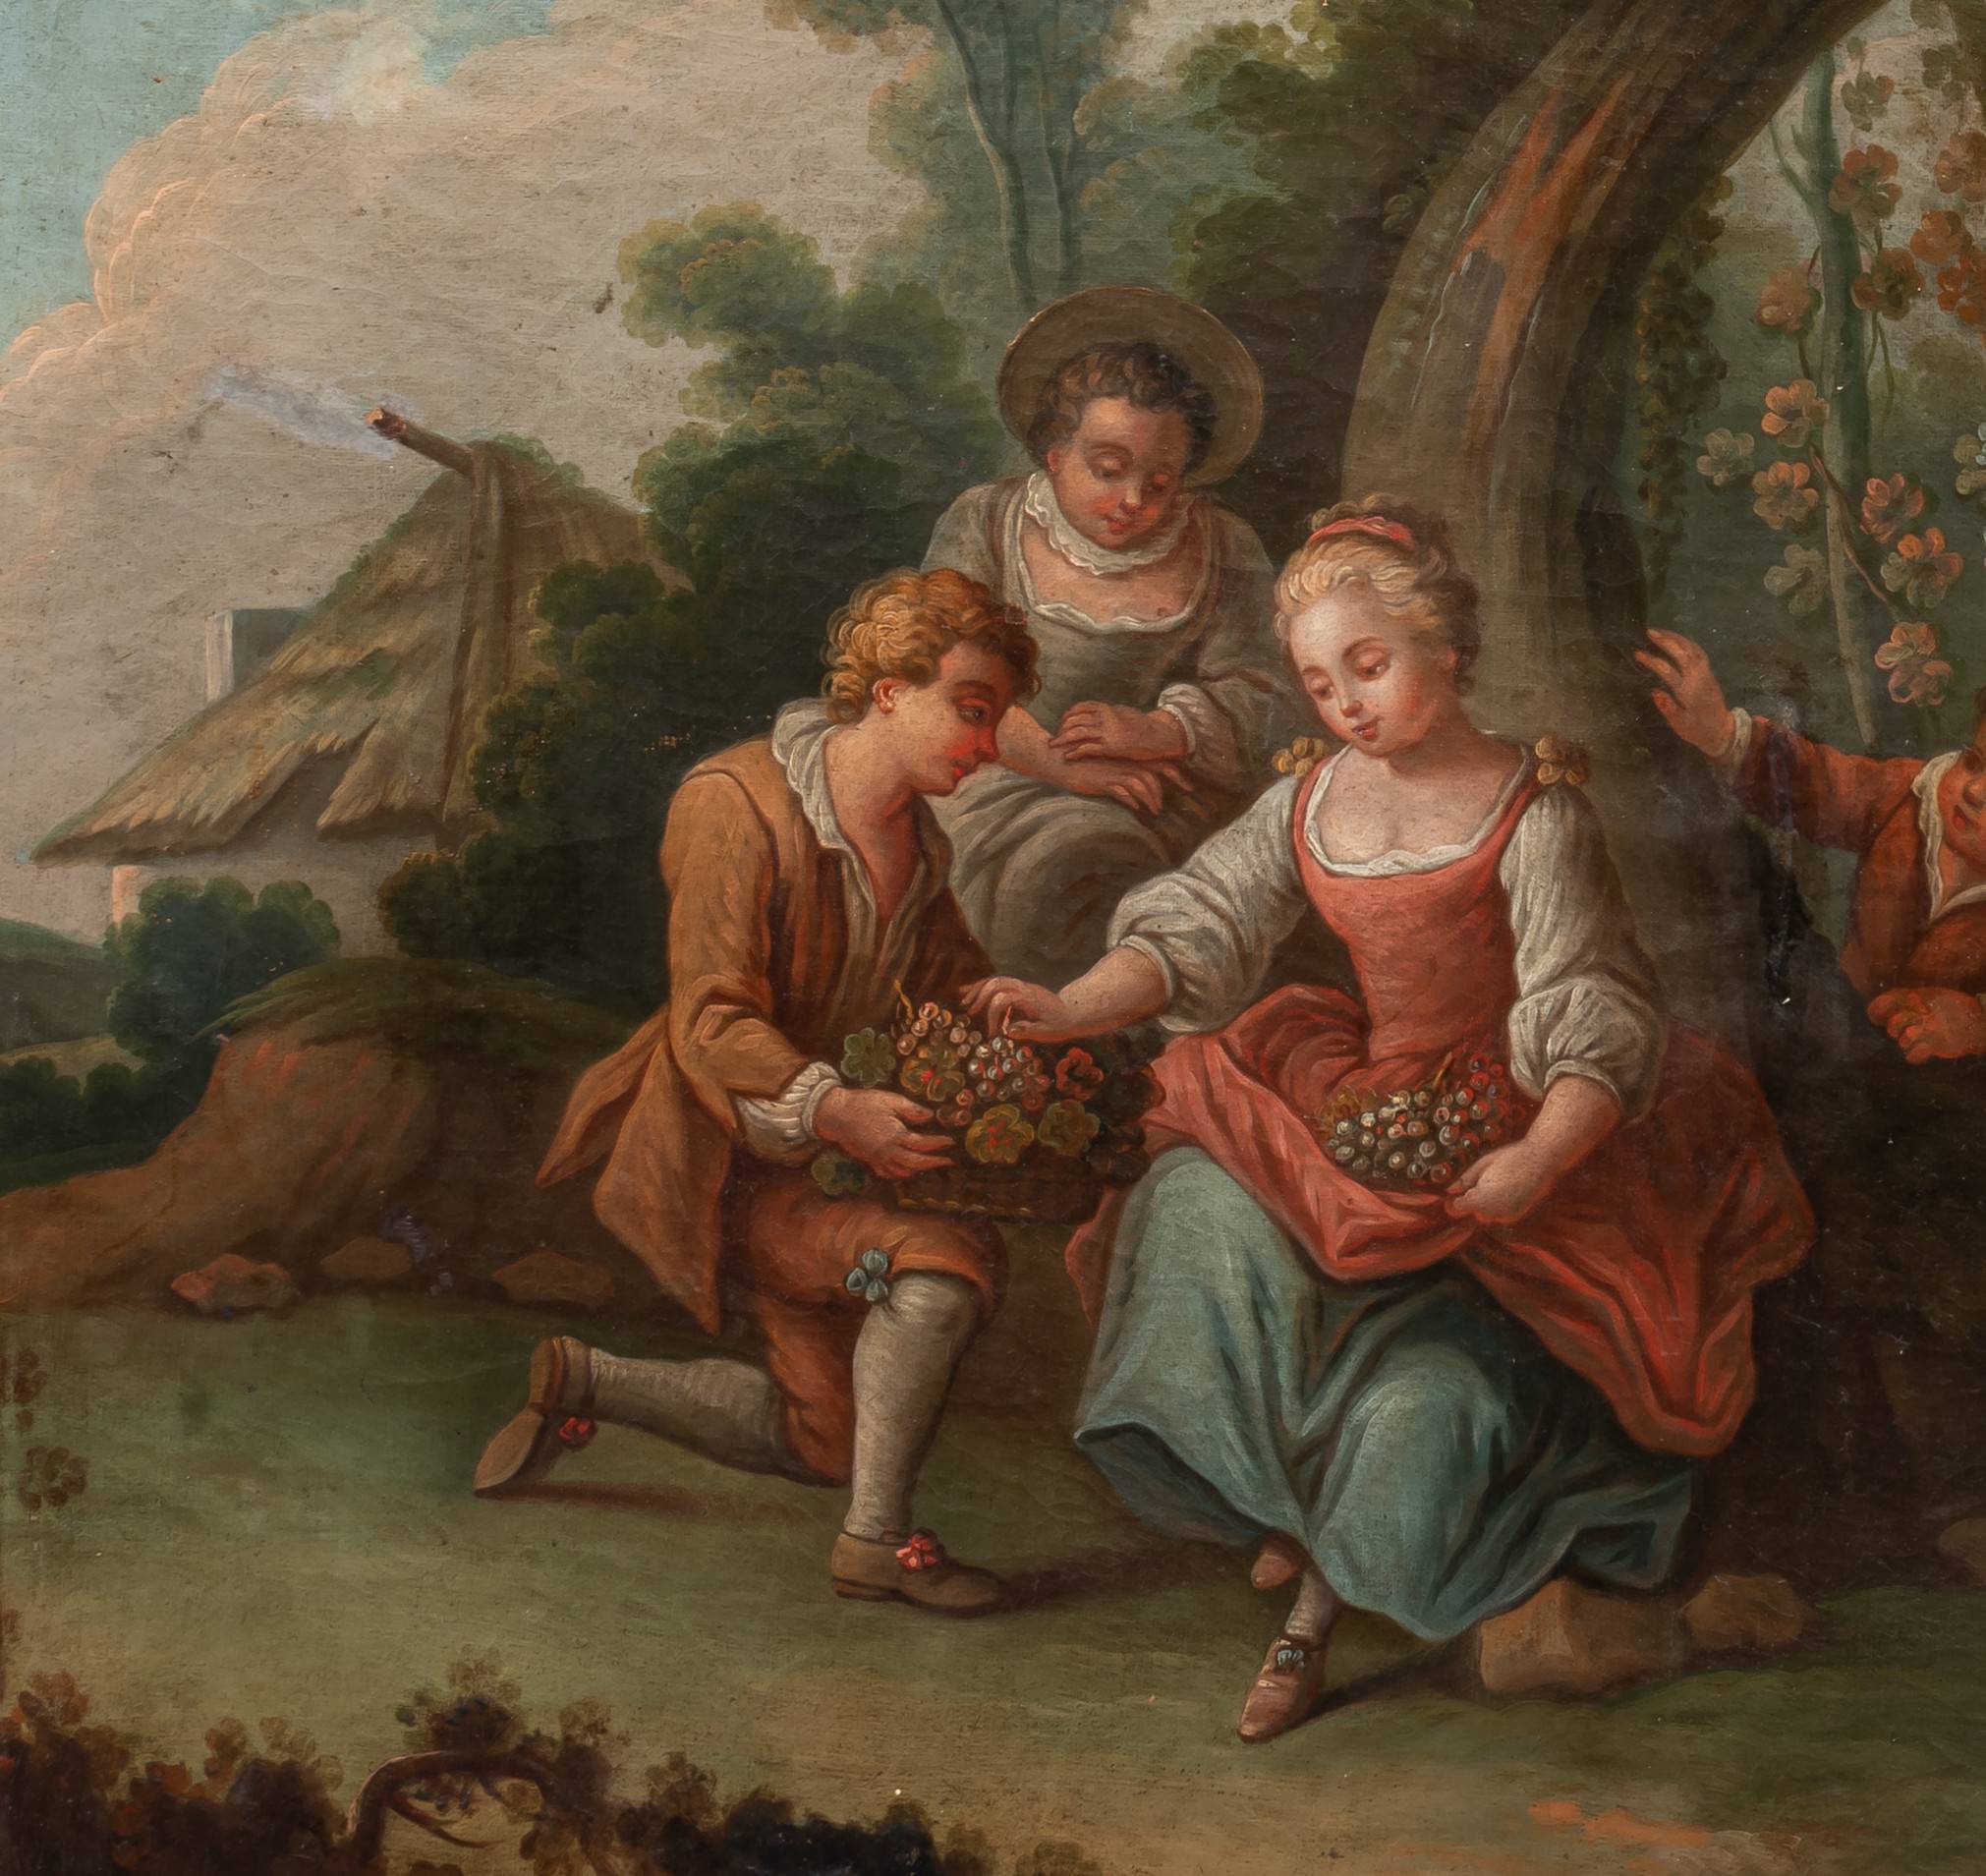 A pair of pendant paintings of gallant scenes in a garden setting, 18thC, oil on canvas, 78 x 91 cm - Image 9 of 12